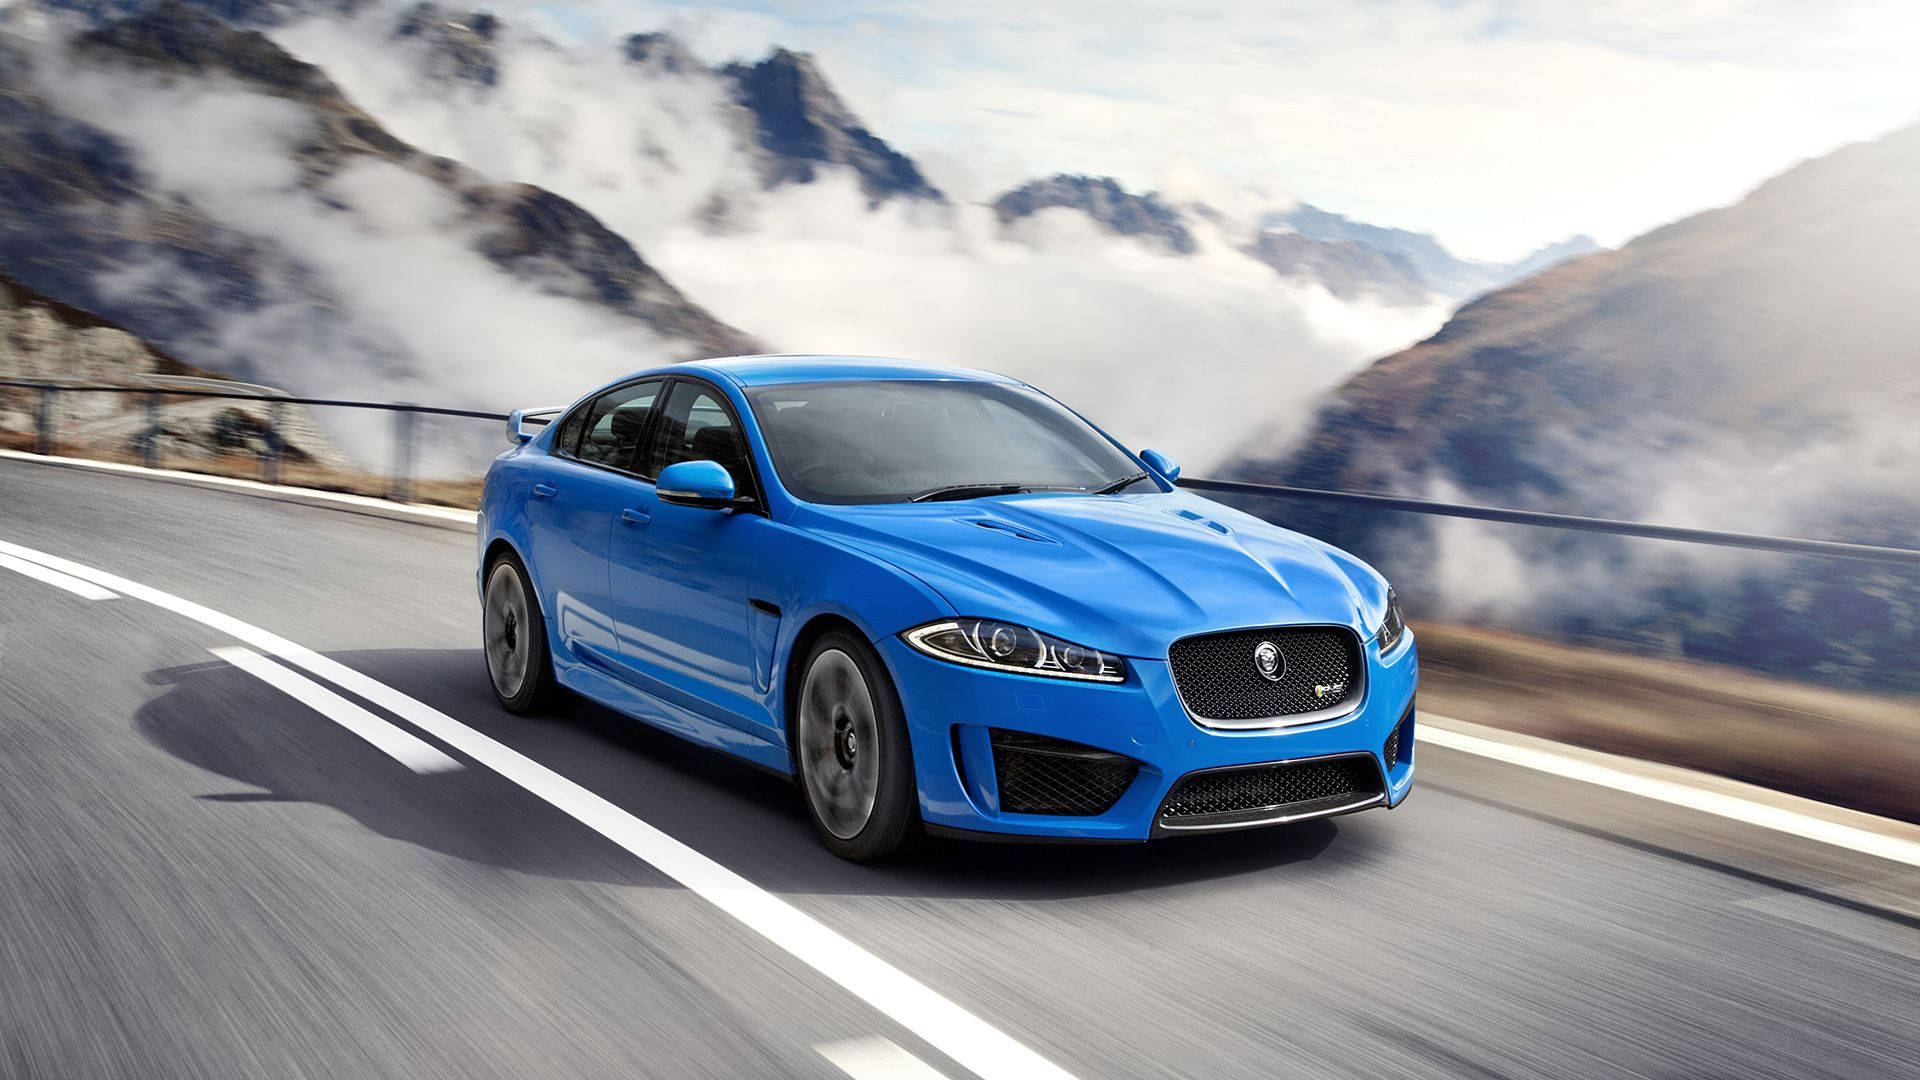 Experience The Majesty Of The Wild In A Blue Jaguar